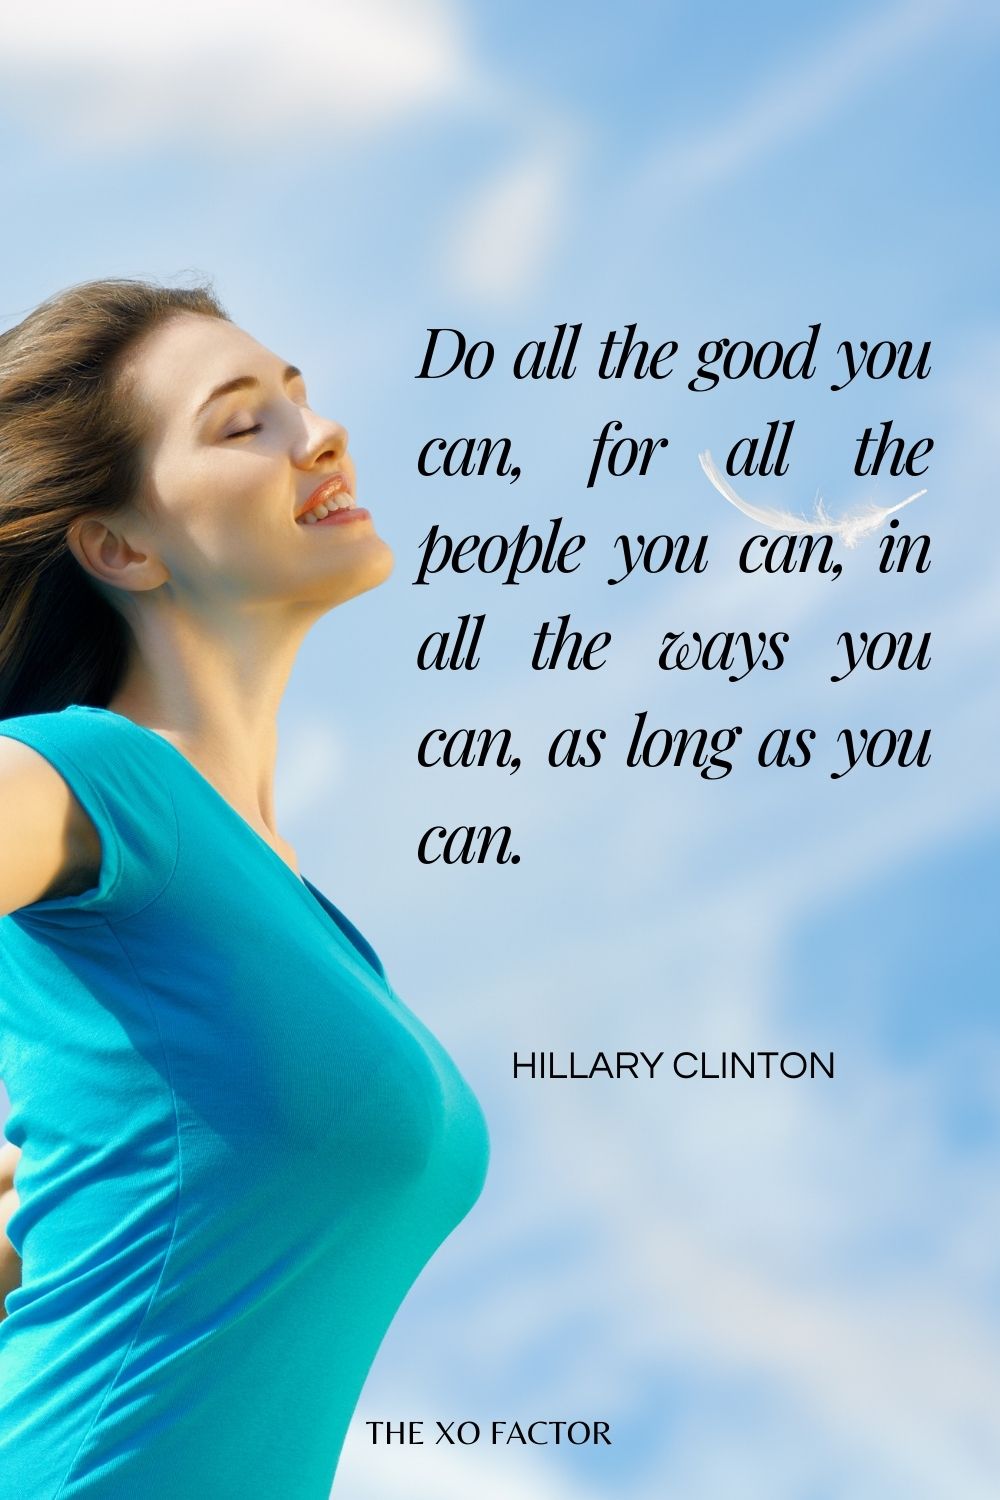 Do all the good you can, for all the people you can, in all the ways you can, as long as you can.” Hillary Clinton (inspired by John Wesley quote) - quotes about life